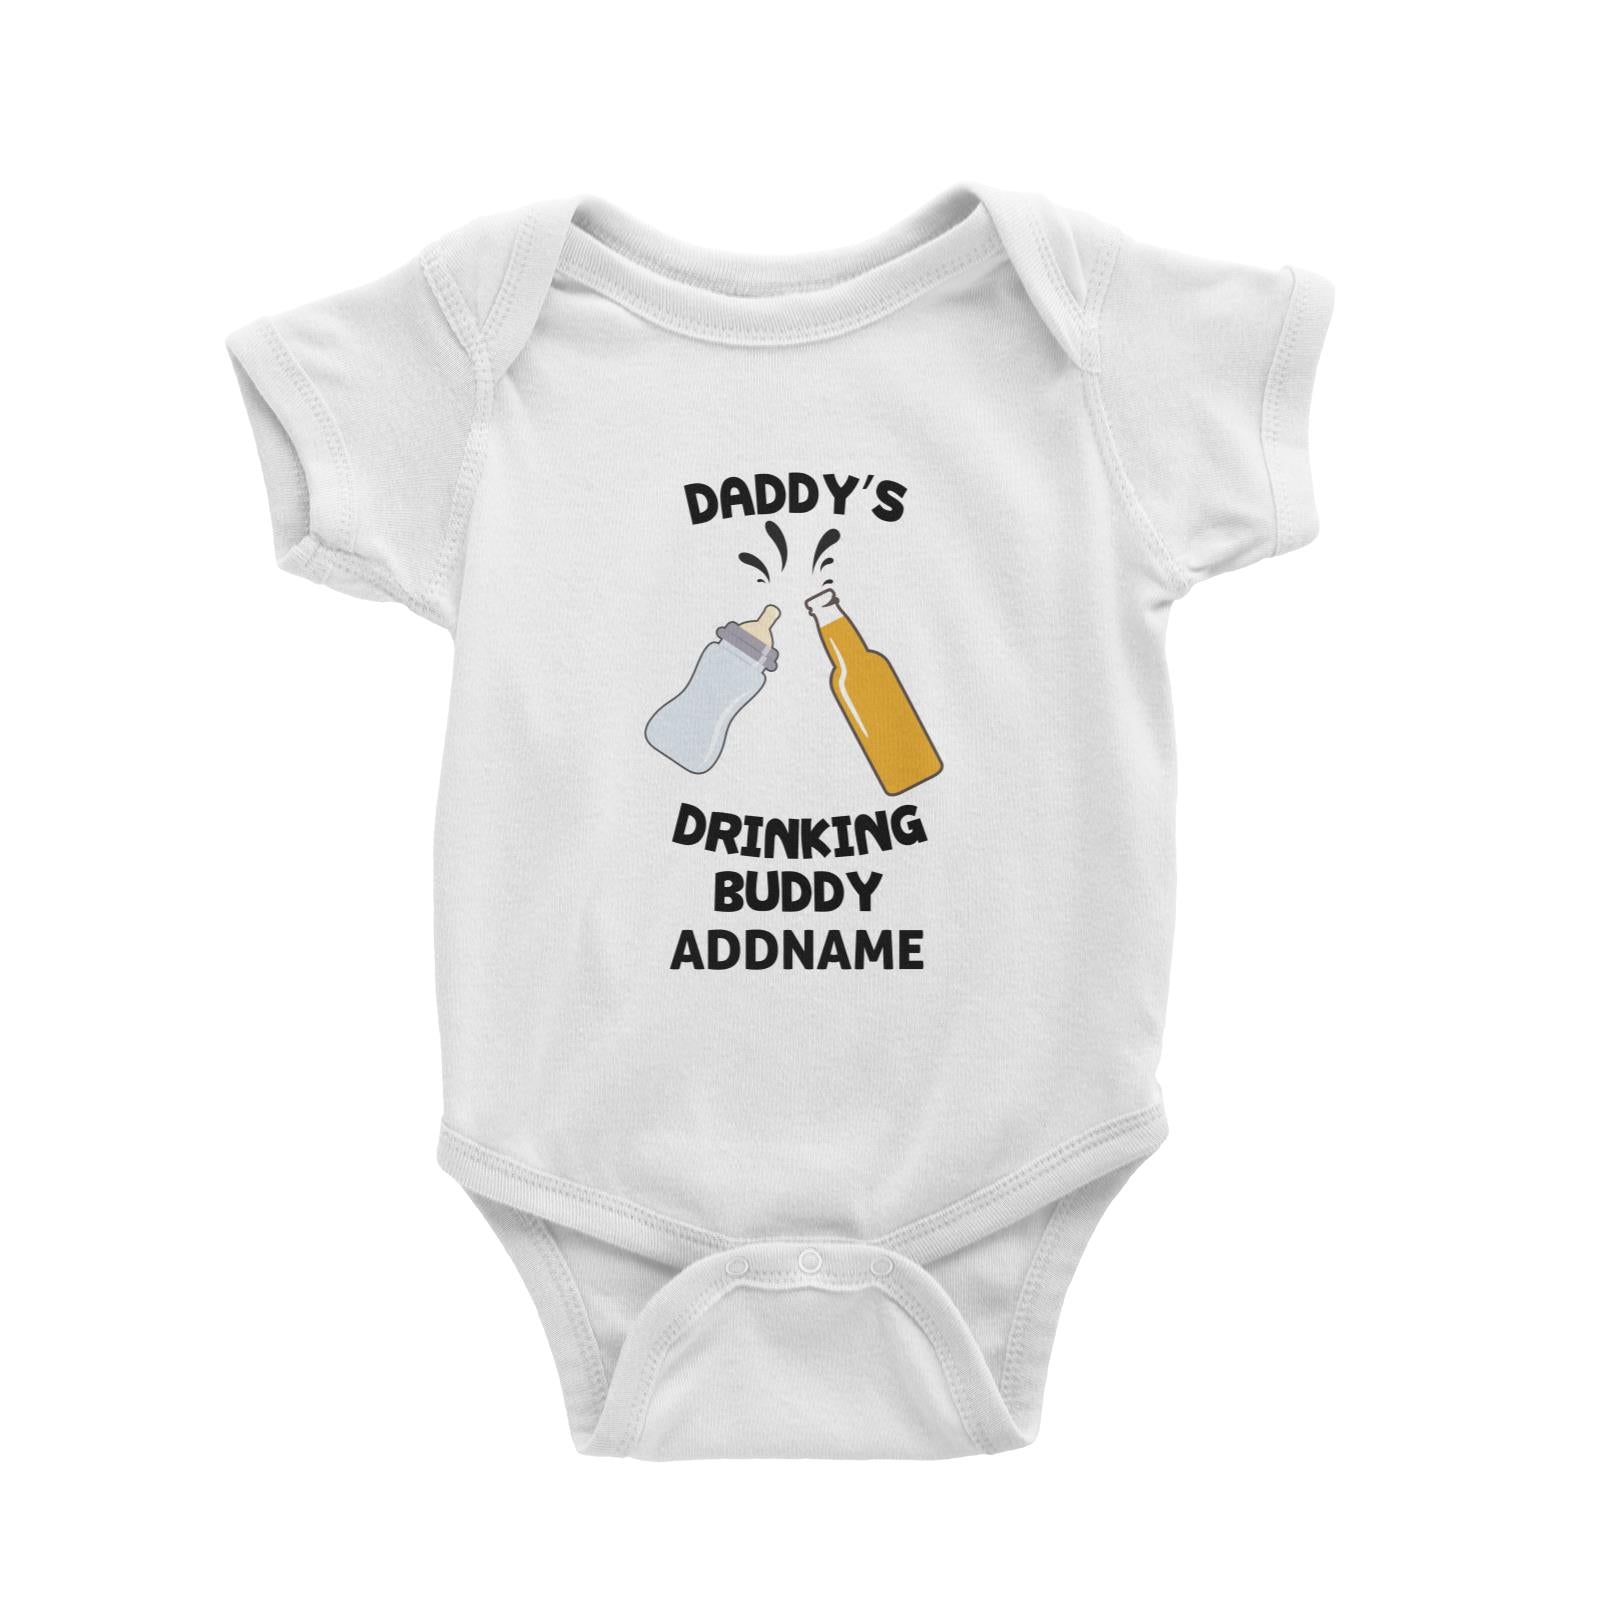 Daddy's Drinking Buddy Addname Baby Romper Personalizable Designs Basic Newborn